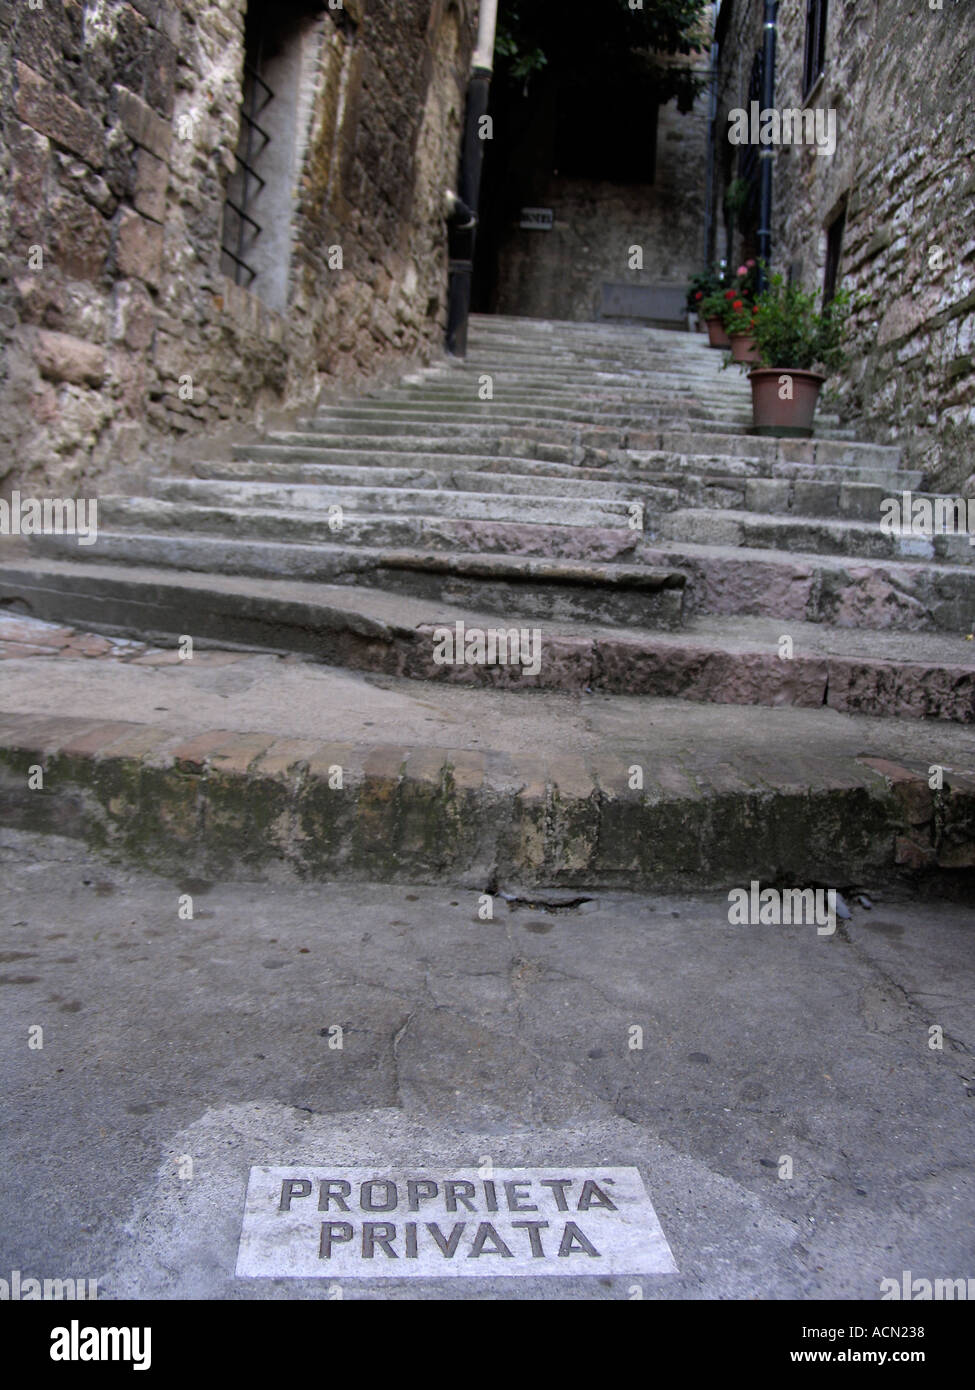 Proprieta Privata Private Property sign inlaid in stone at foot of worn staircase Assisi Italy Stock Photo